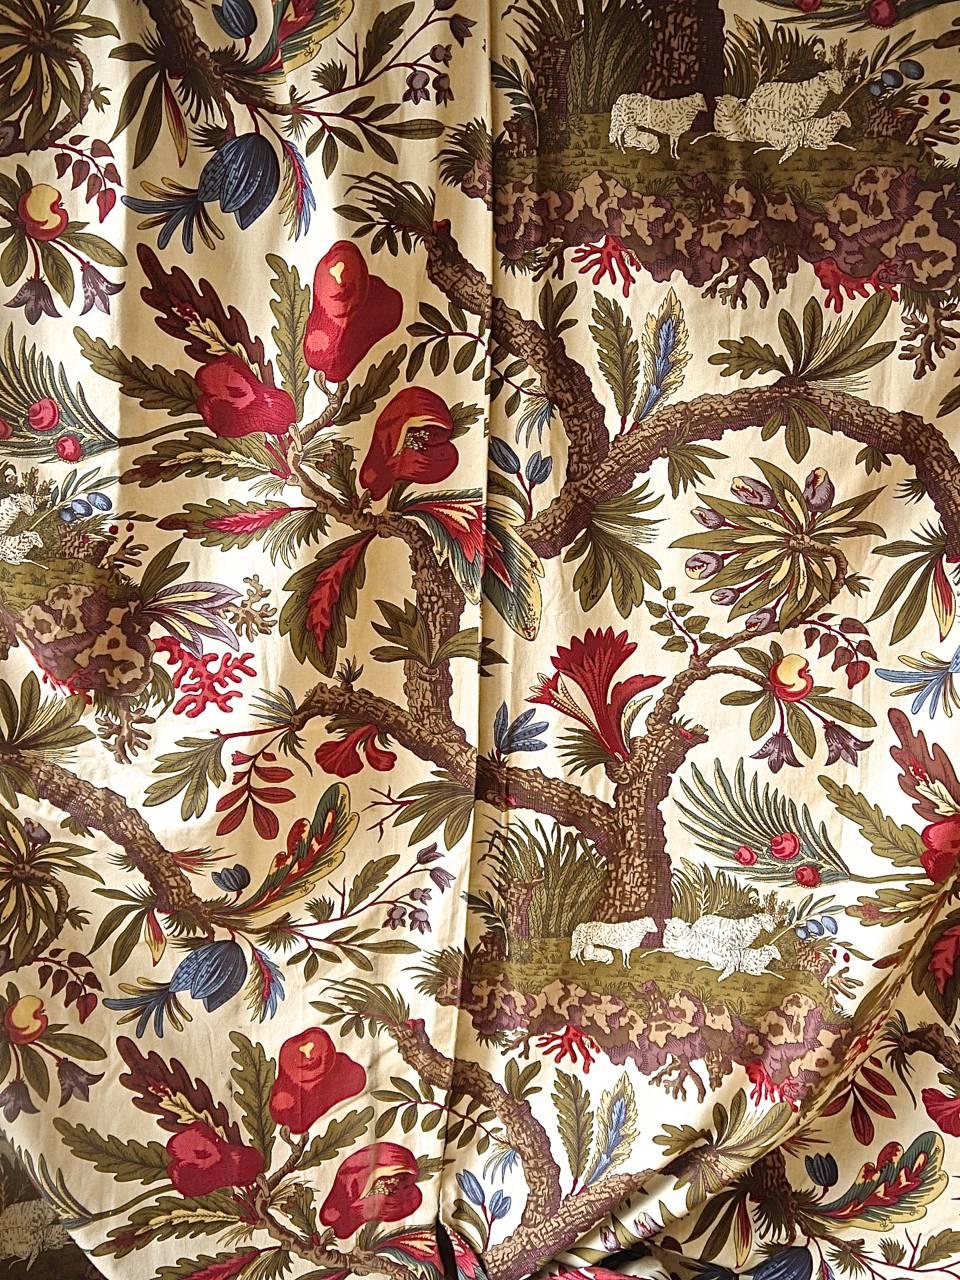 French antique very large pair of cotton curtains with a fabulous design of exotic flowers on meandering branches with a flock of sheep sheltering under a tree. Its original use was probably as hangings on a four-poster bed. Each curtain doubles